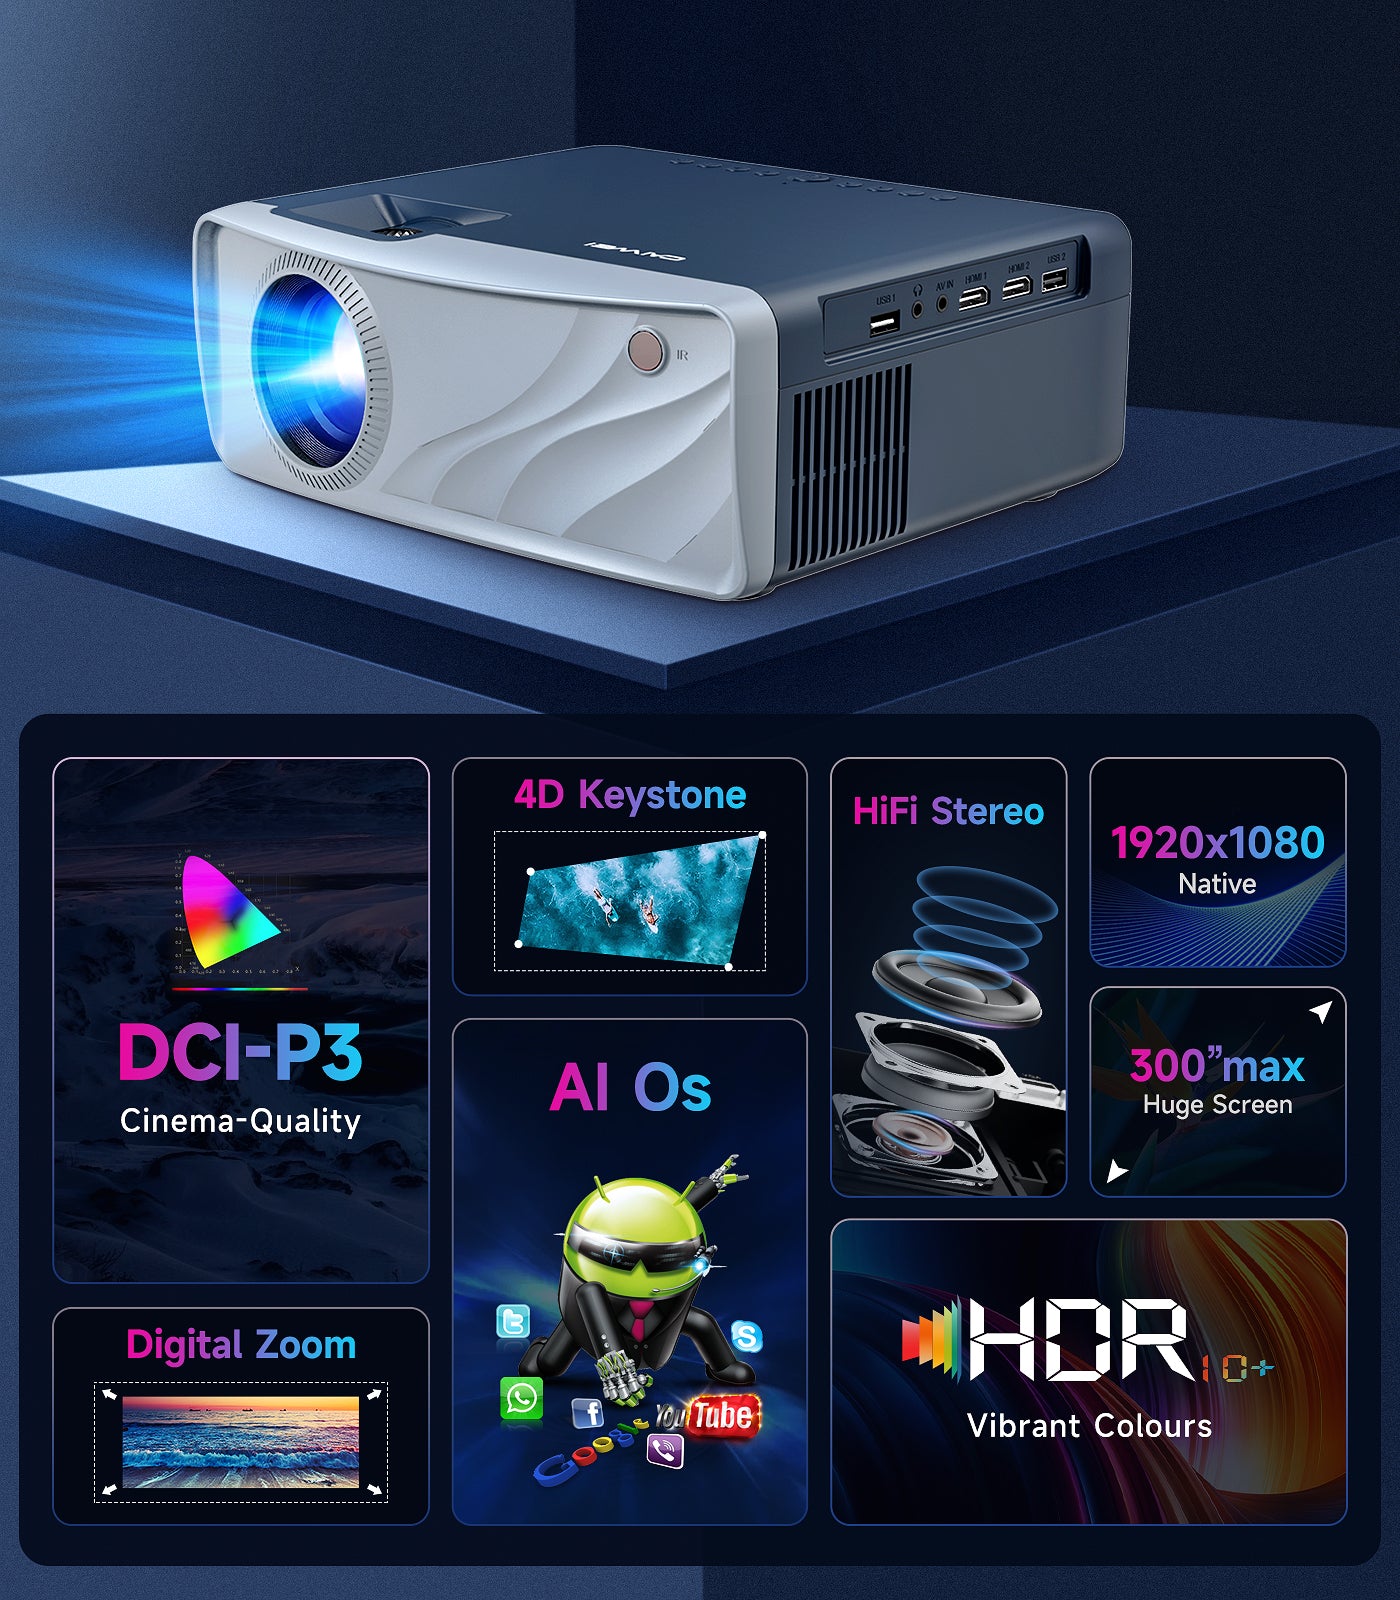 4K Projector 5G WiFi 2023 Upgraded 950 ANSI Lumen LCD Outdoor